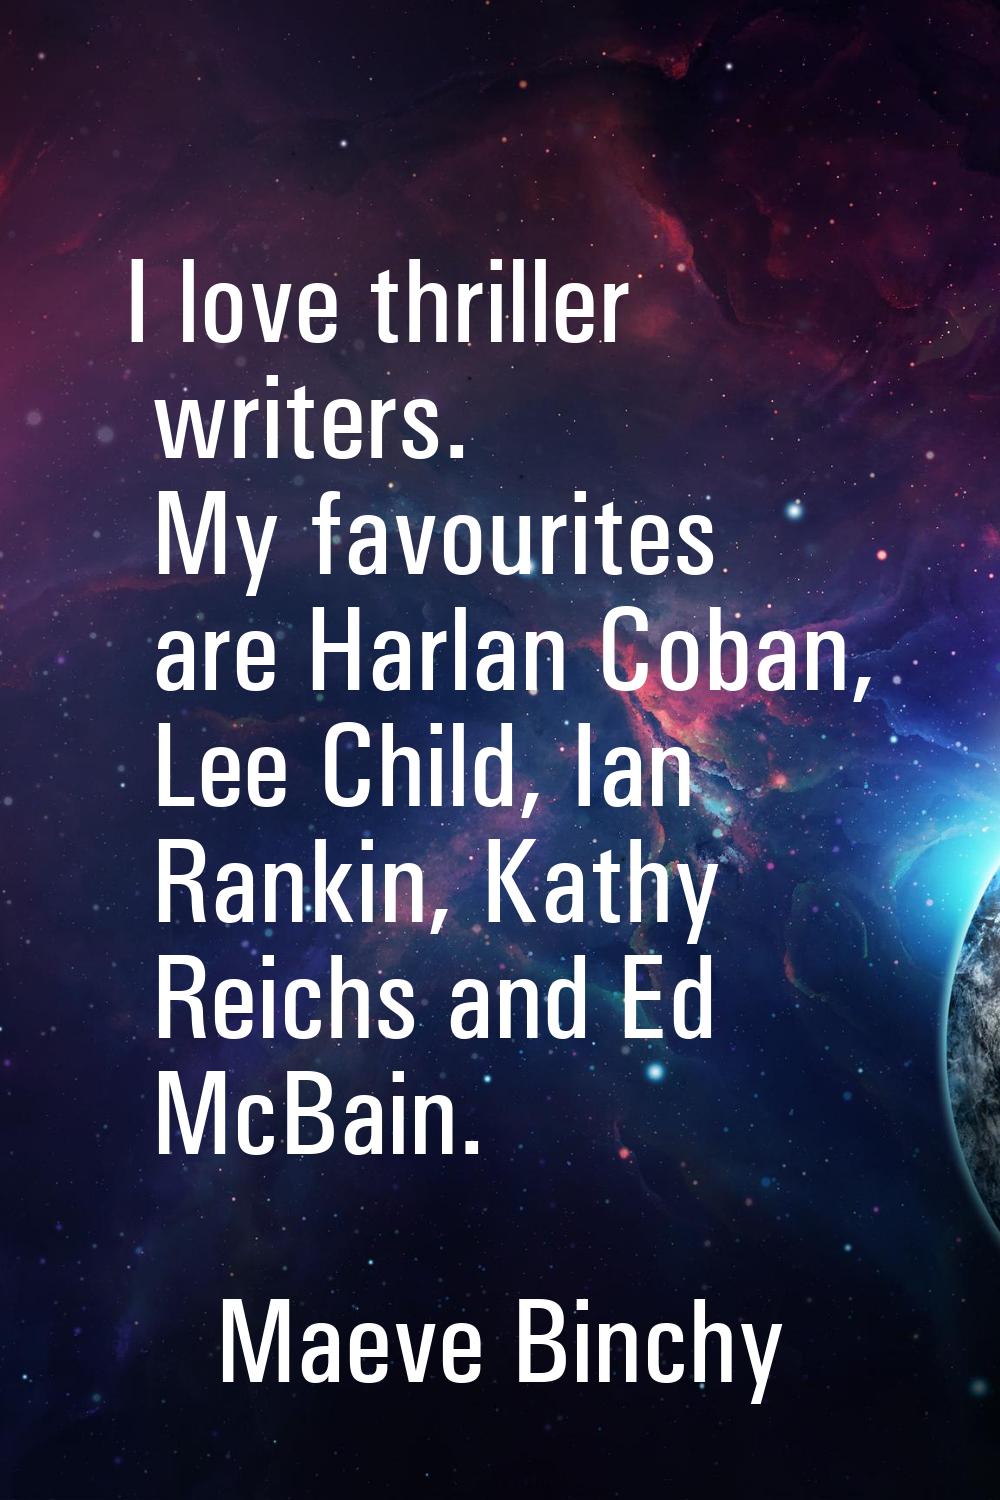 I love thriller writers. My favourites are Harlan Coban, Lee Child, Ian Rankin, Kathy Reichs and Ed